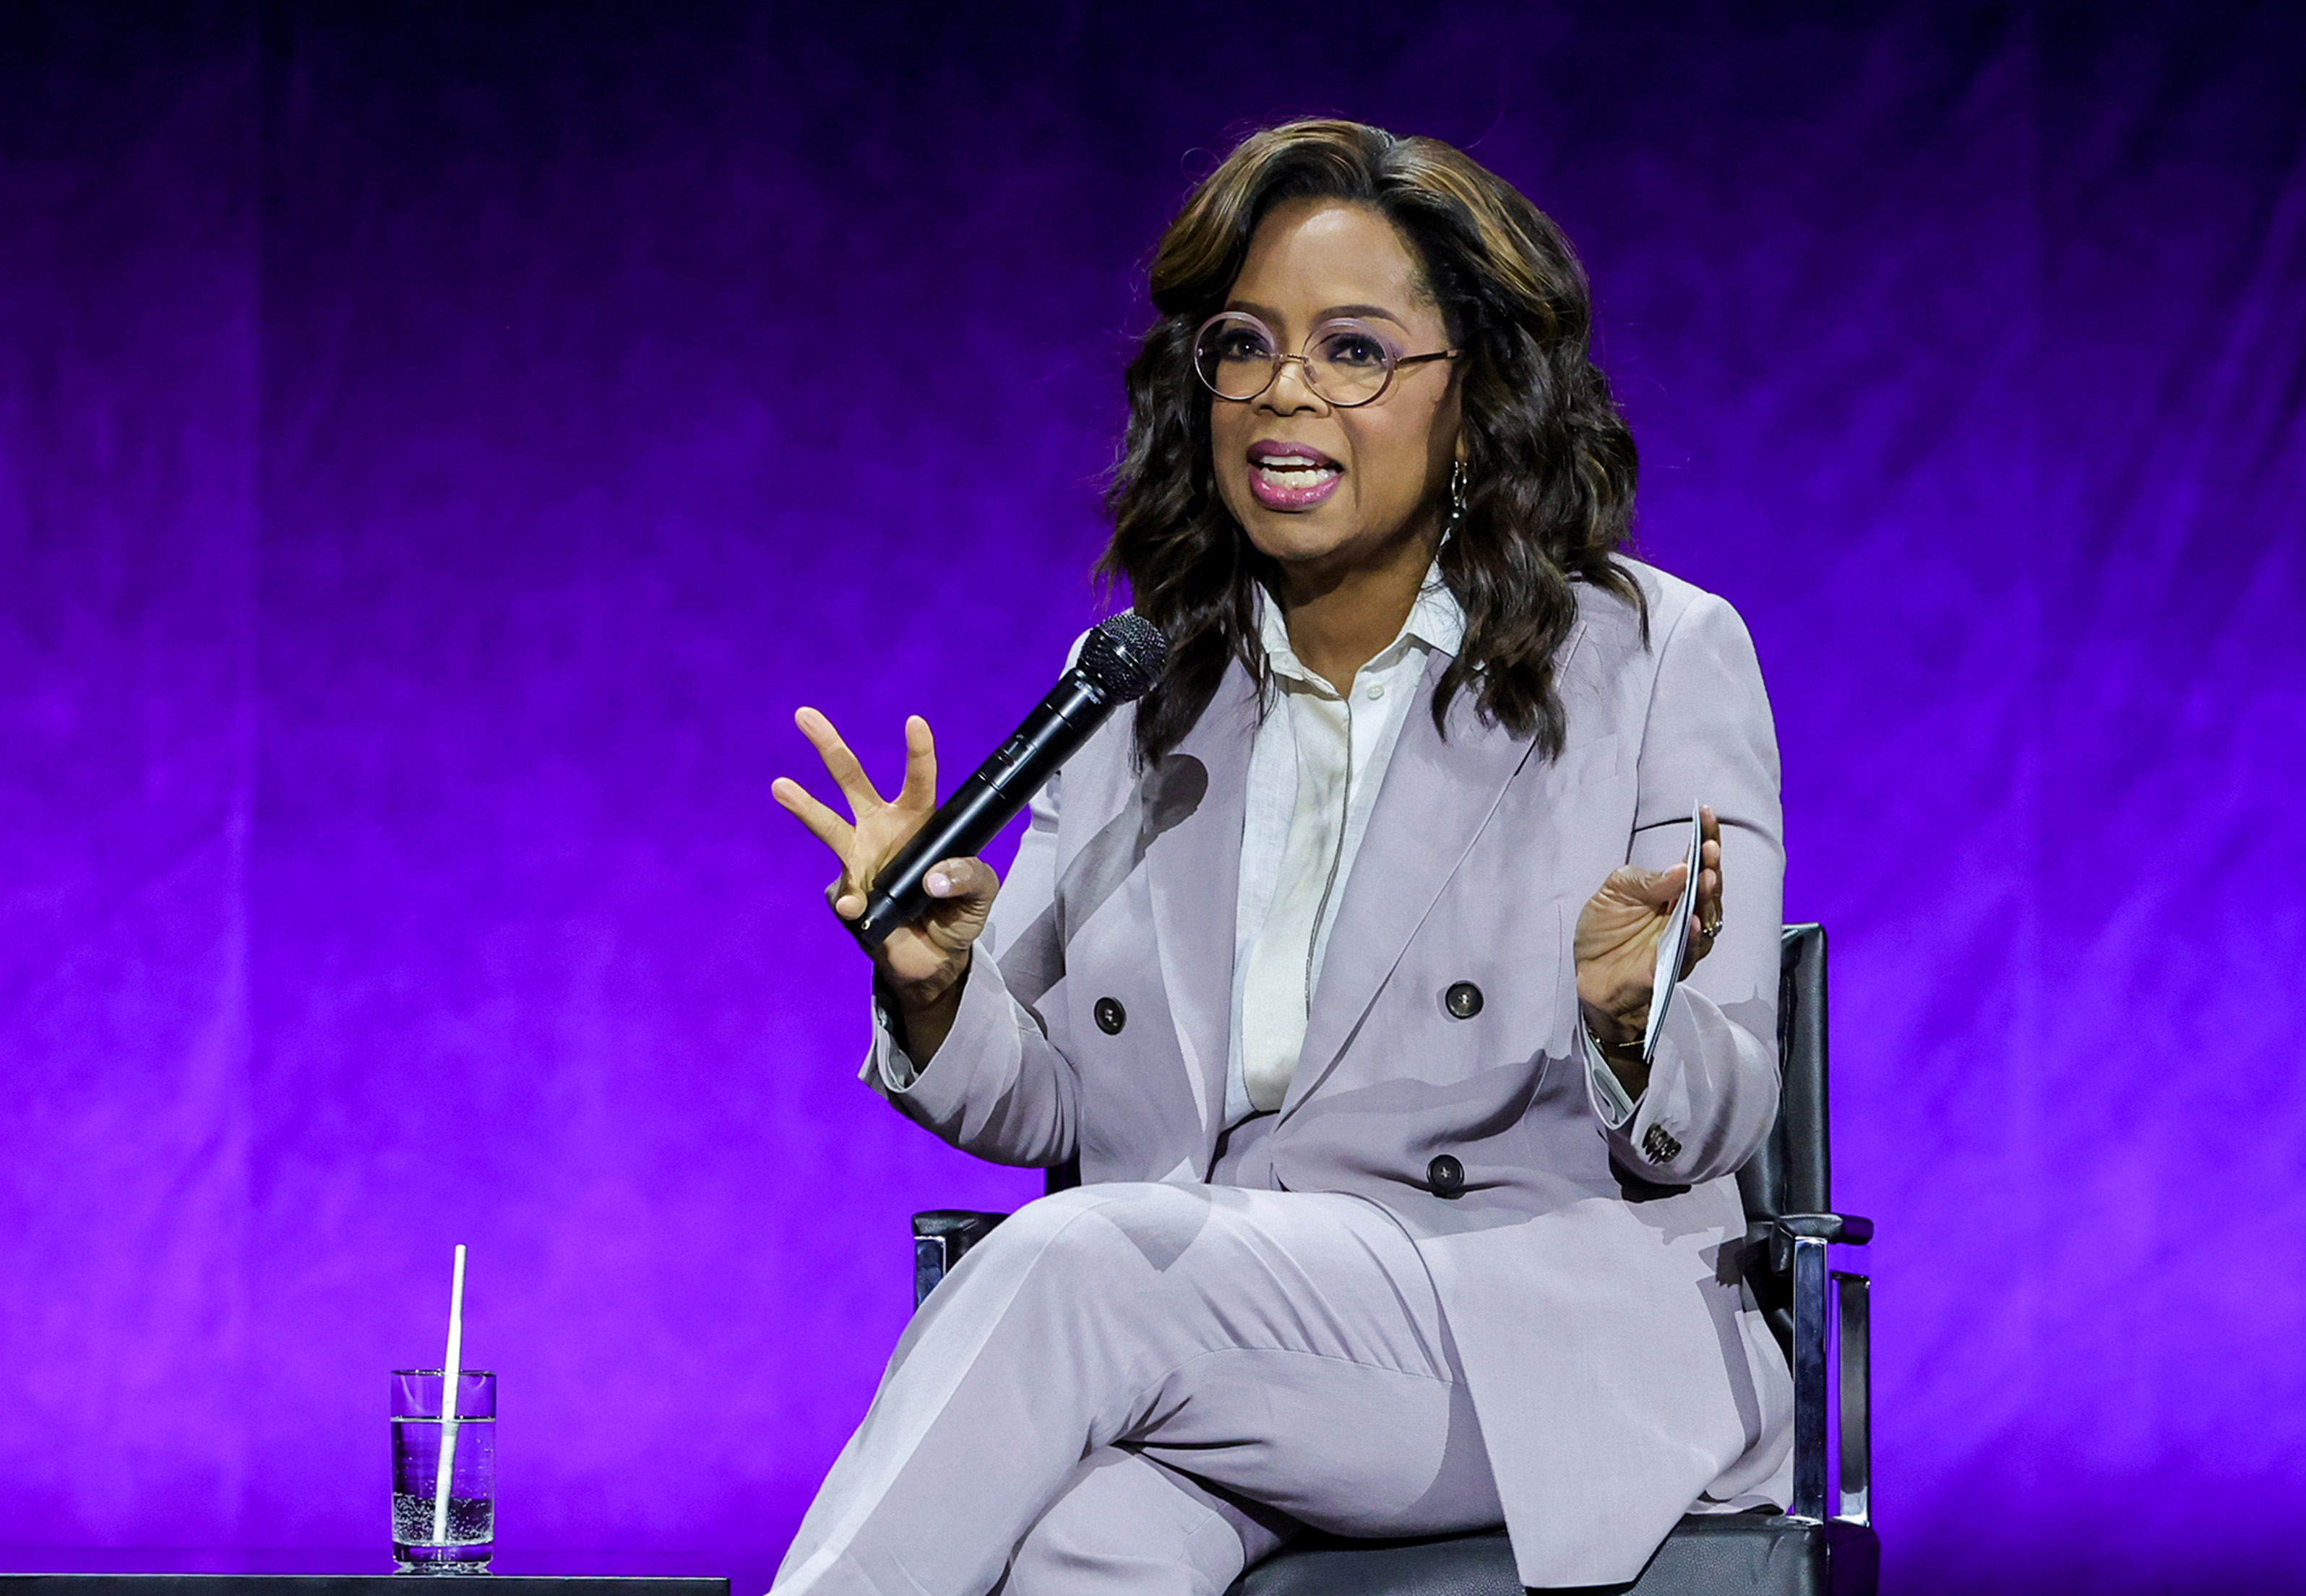 Oprah sitting on a stage in a chair, wearing a grey suit, speaking into a microphone